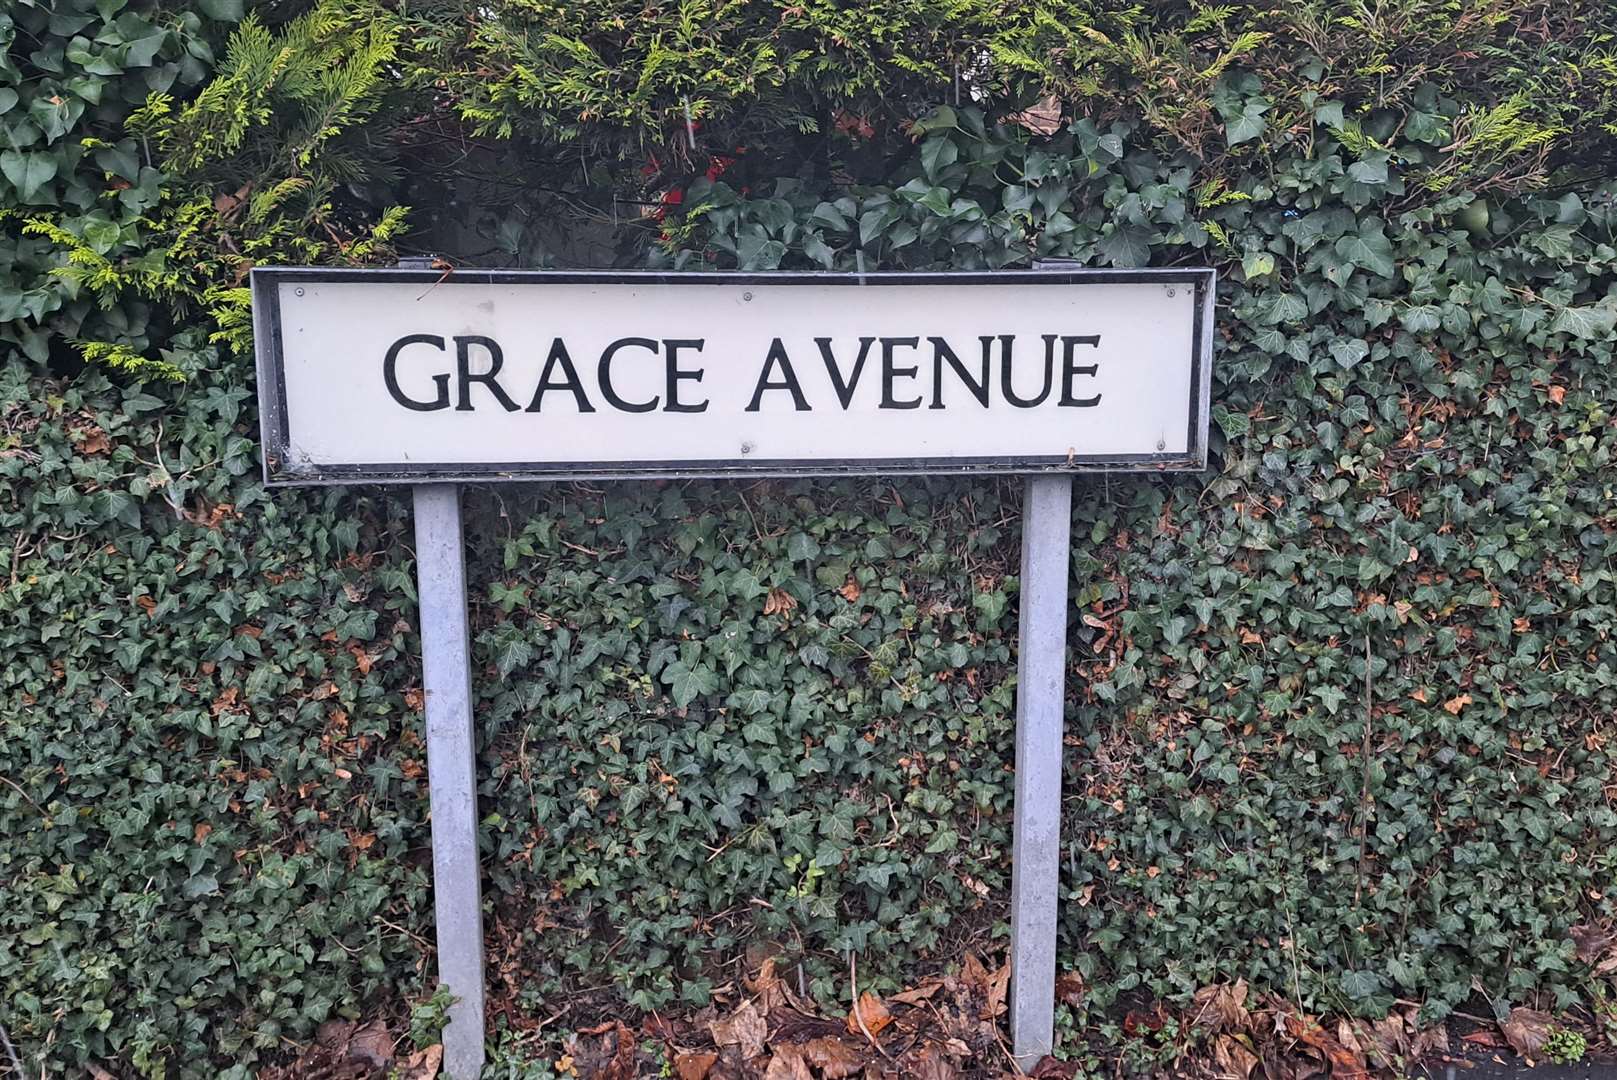 Grace Avenue is a development of semi-detached homes built in the 1920s